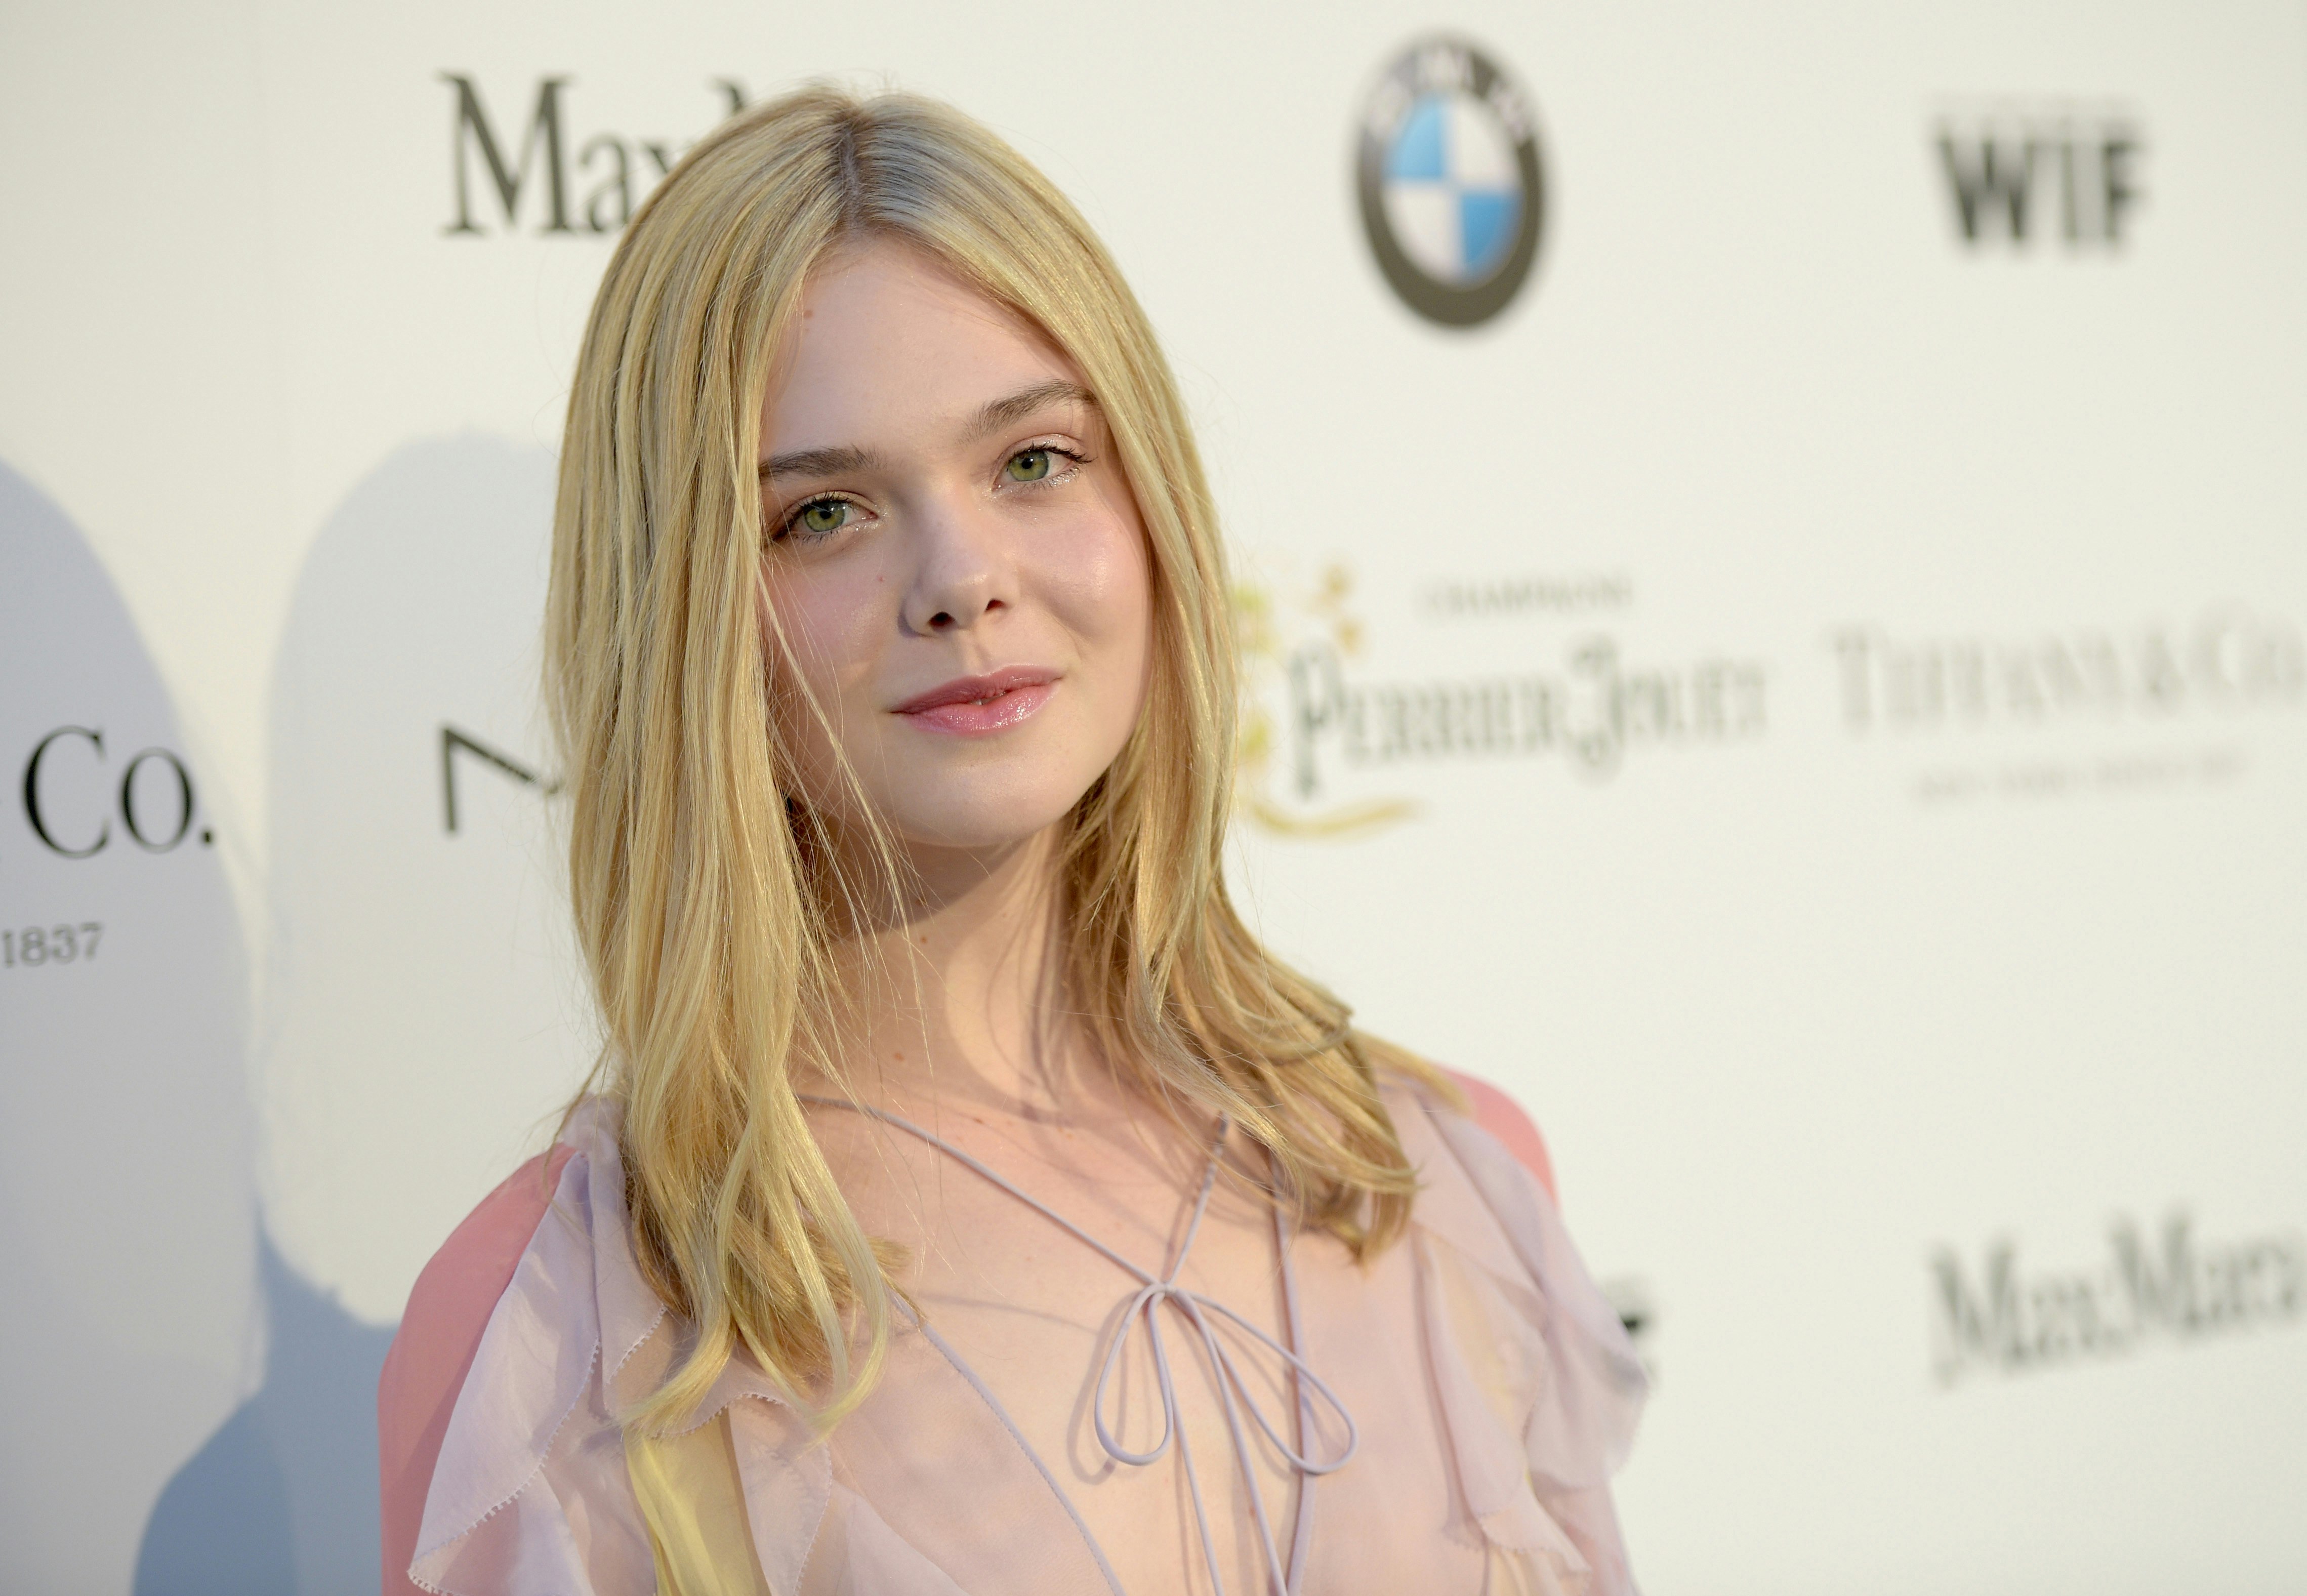 Elle Fanning shows off her perfectly skin as she poses in a